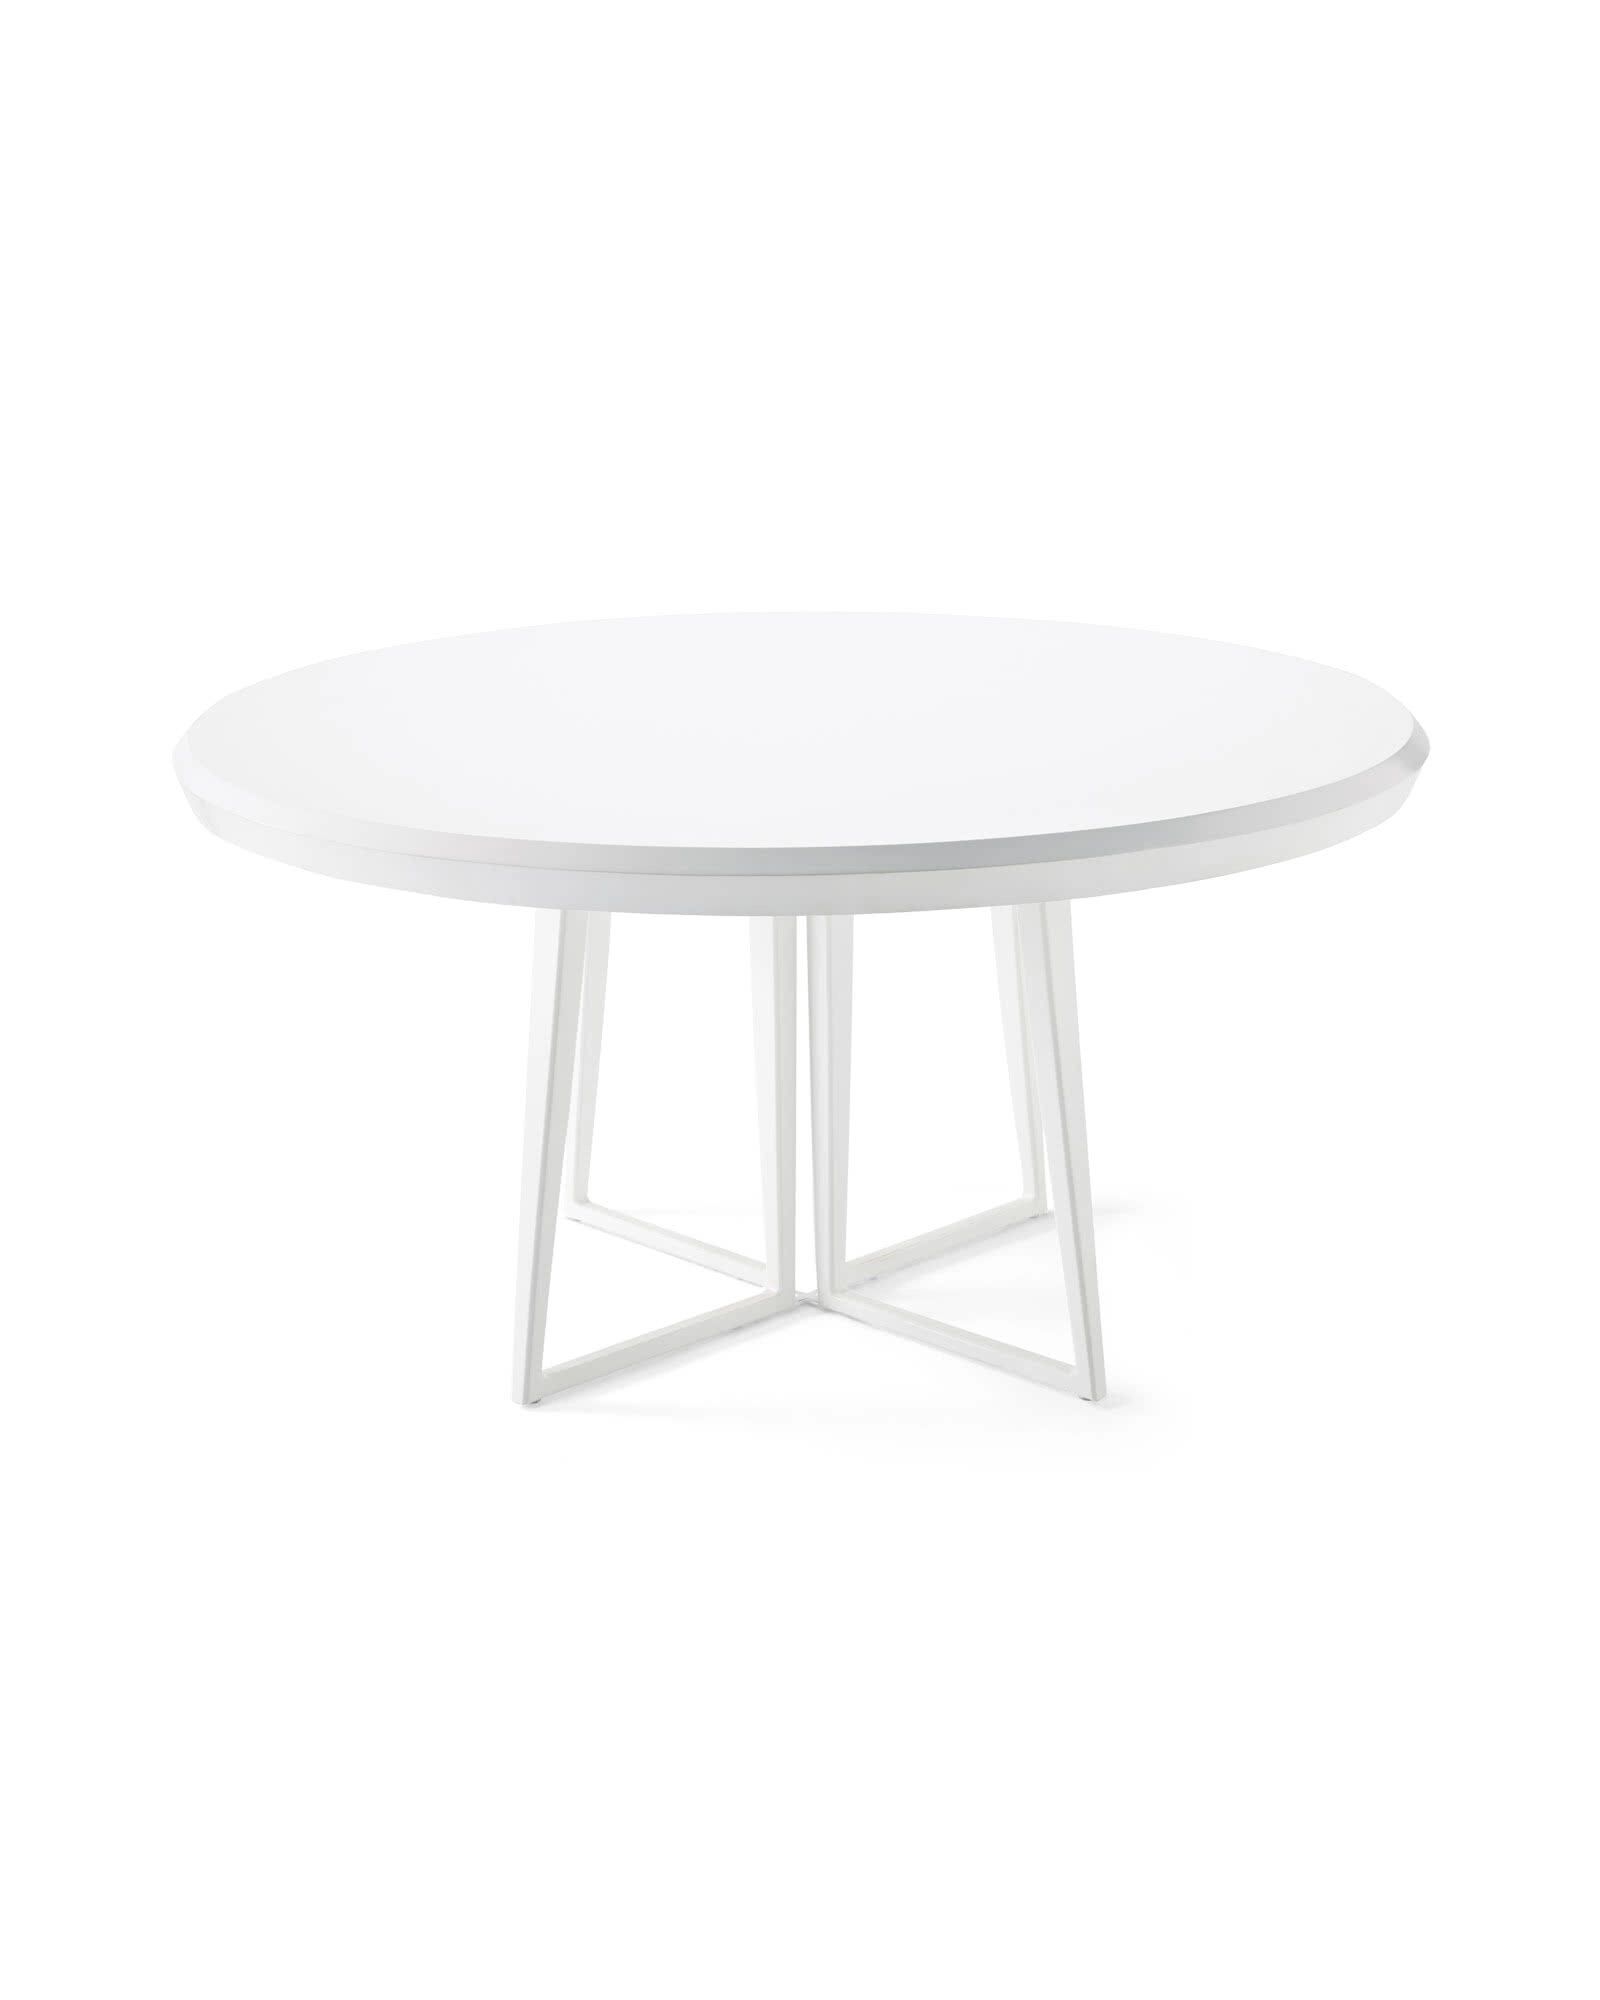 Downing 60" Dining Table | Serena and Lily